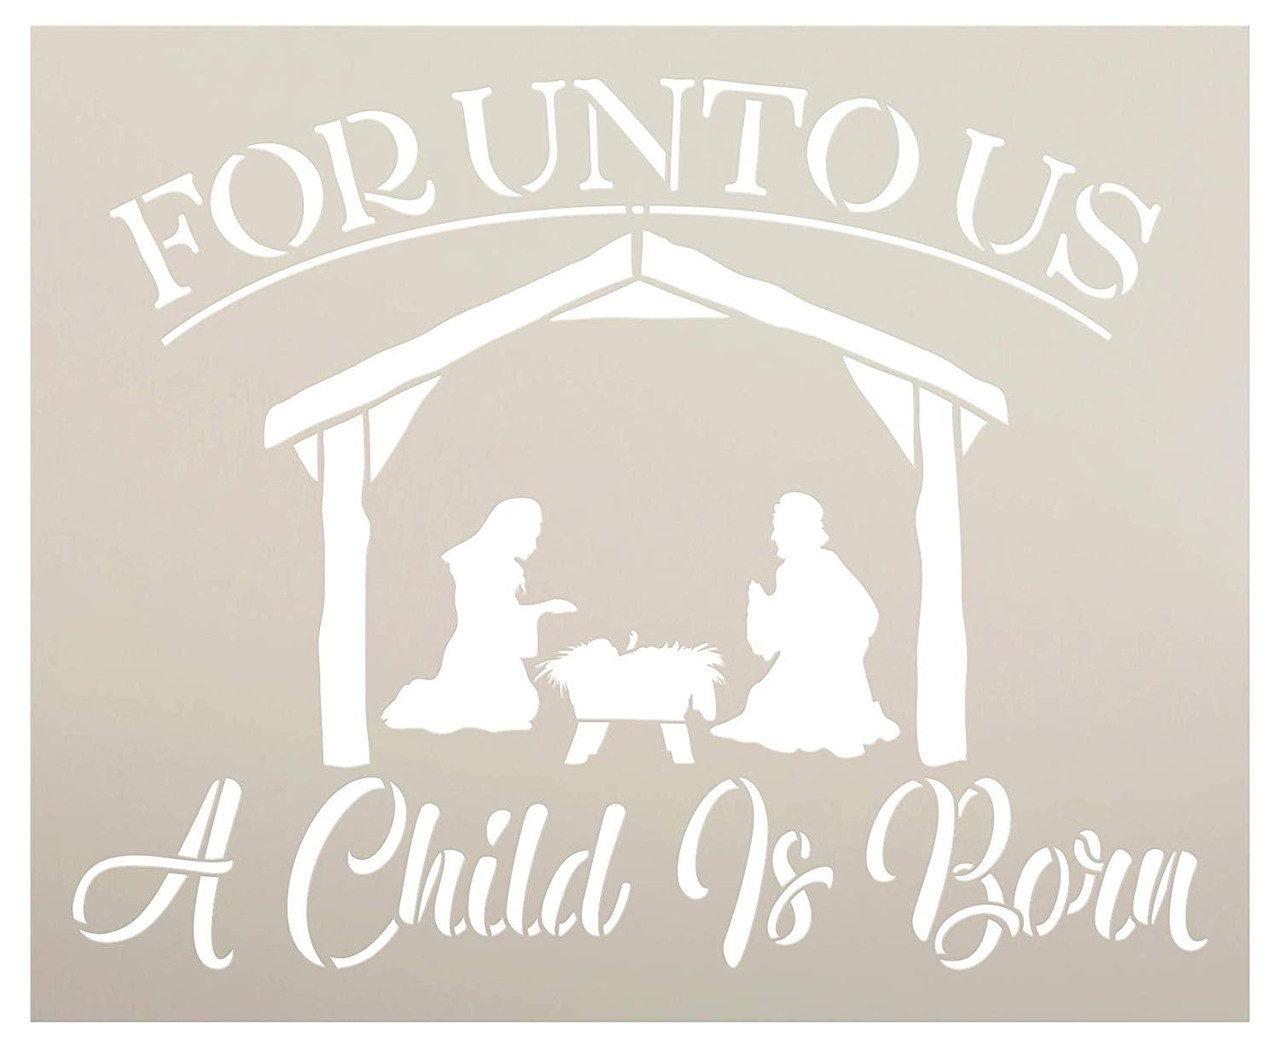 Unto Us A Child is Born Stencil with Nativity Scene by StudioR12 | Bible Verse Hymn Manger Christmas Decor | Reusable Mylar Template | Paint Wood Signs | DIY Home Crafting | Select Size